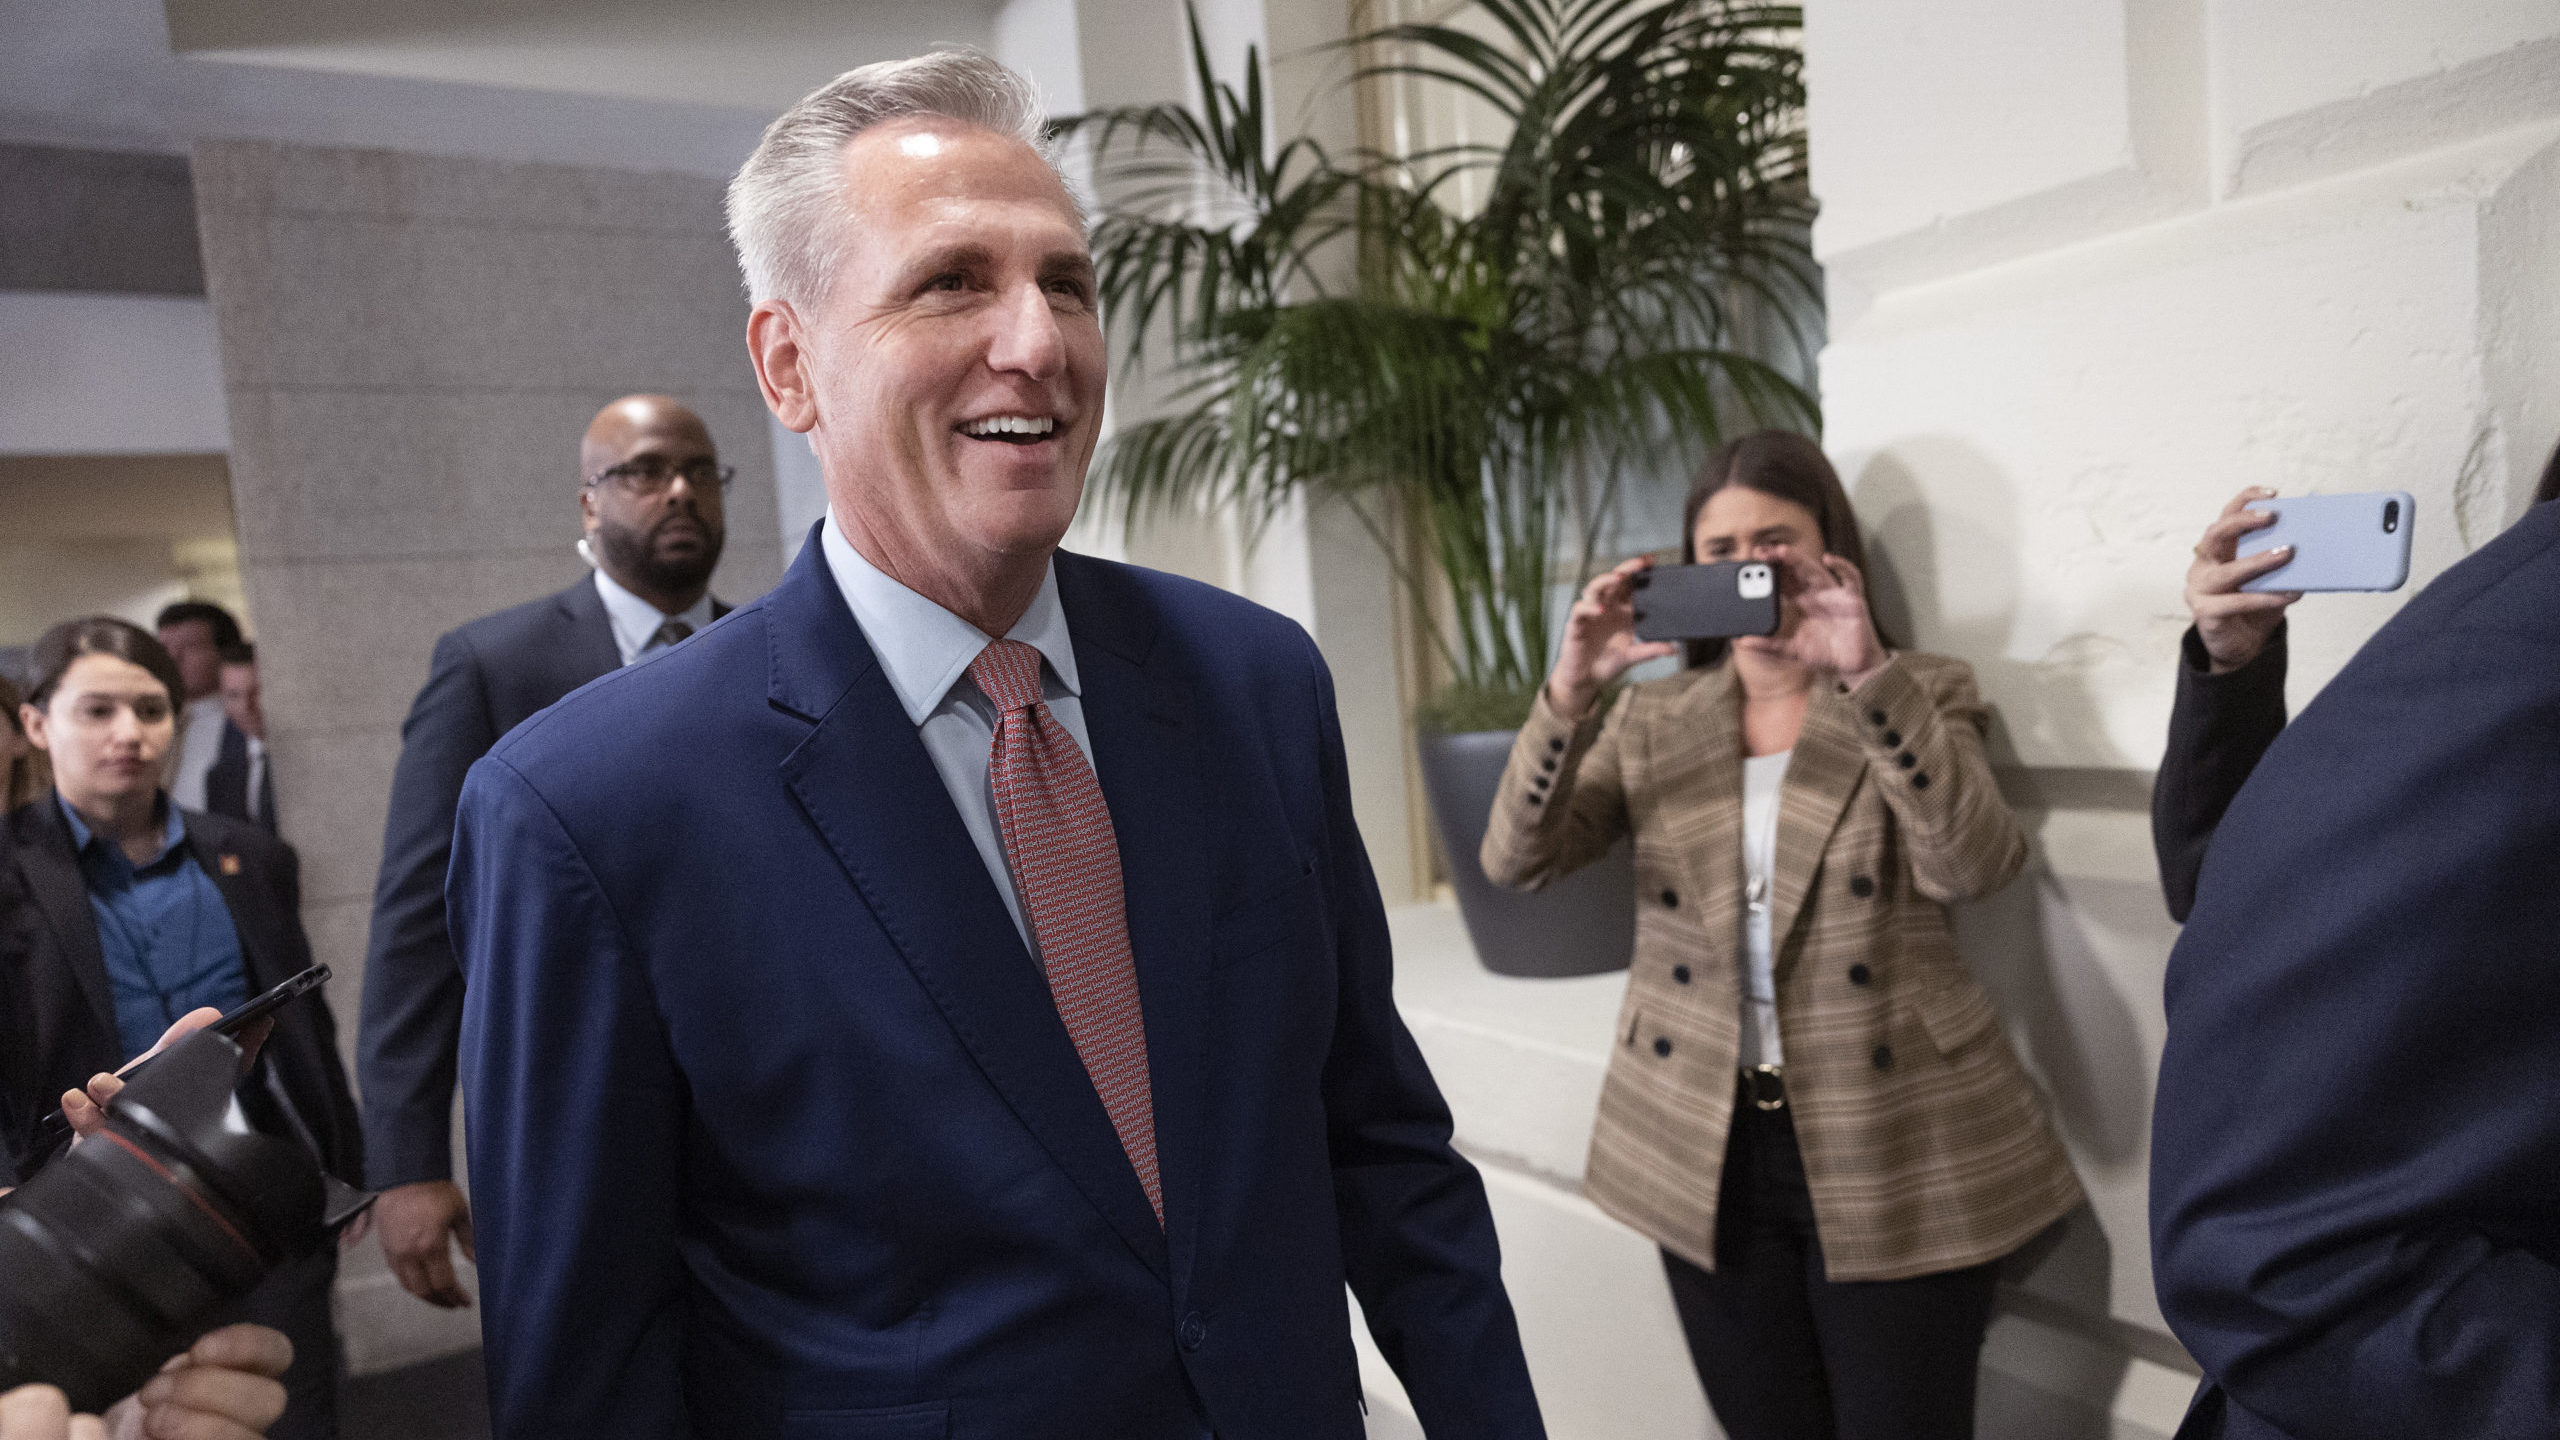 After an epic 15-ballot election to become House speaker, Republican Kevin McCarthy faces his next ...